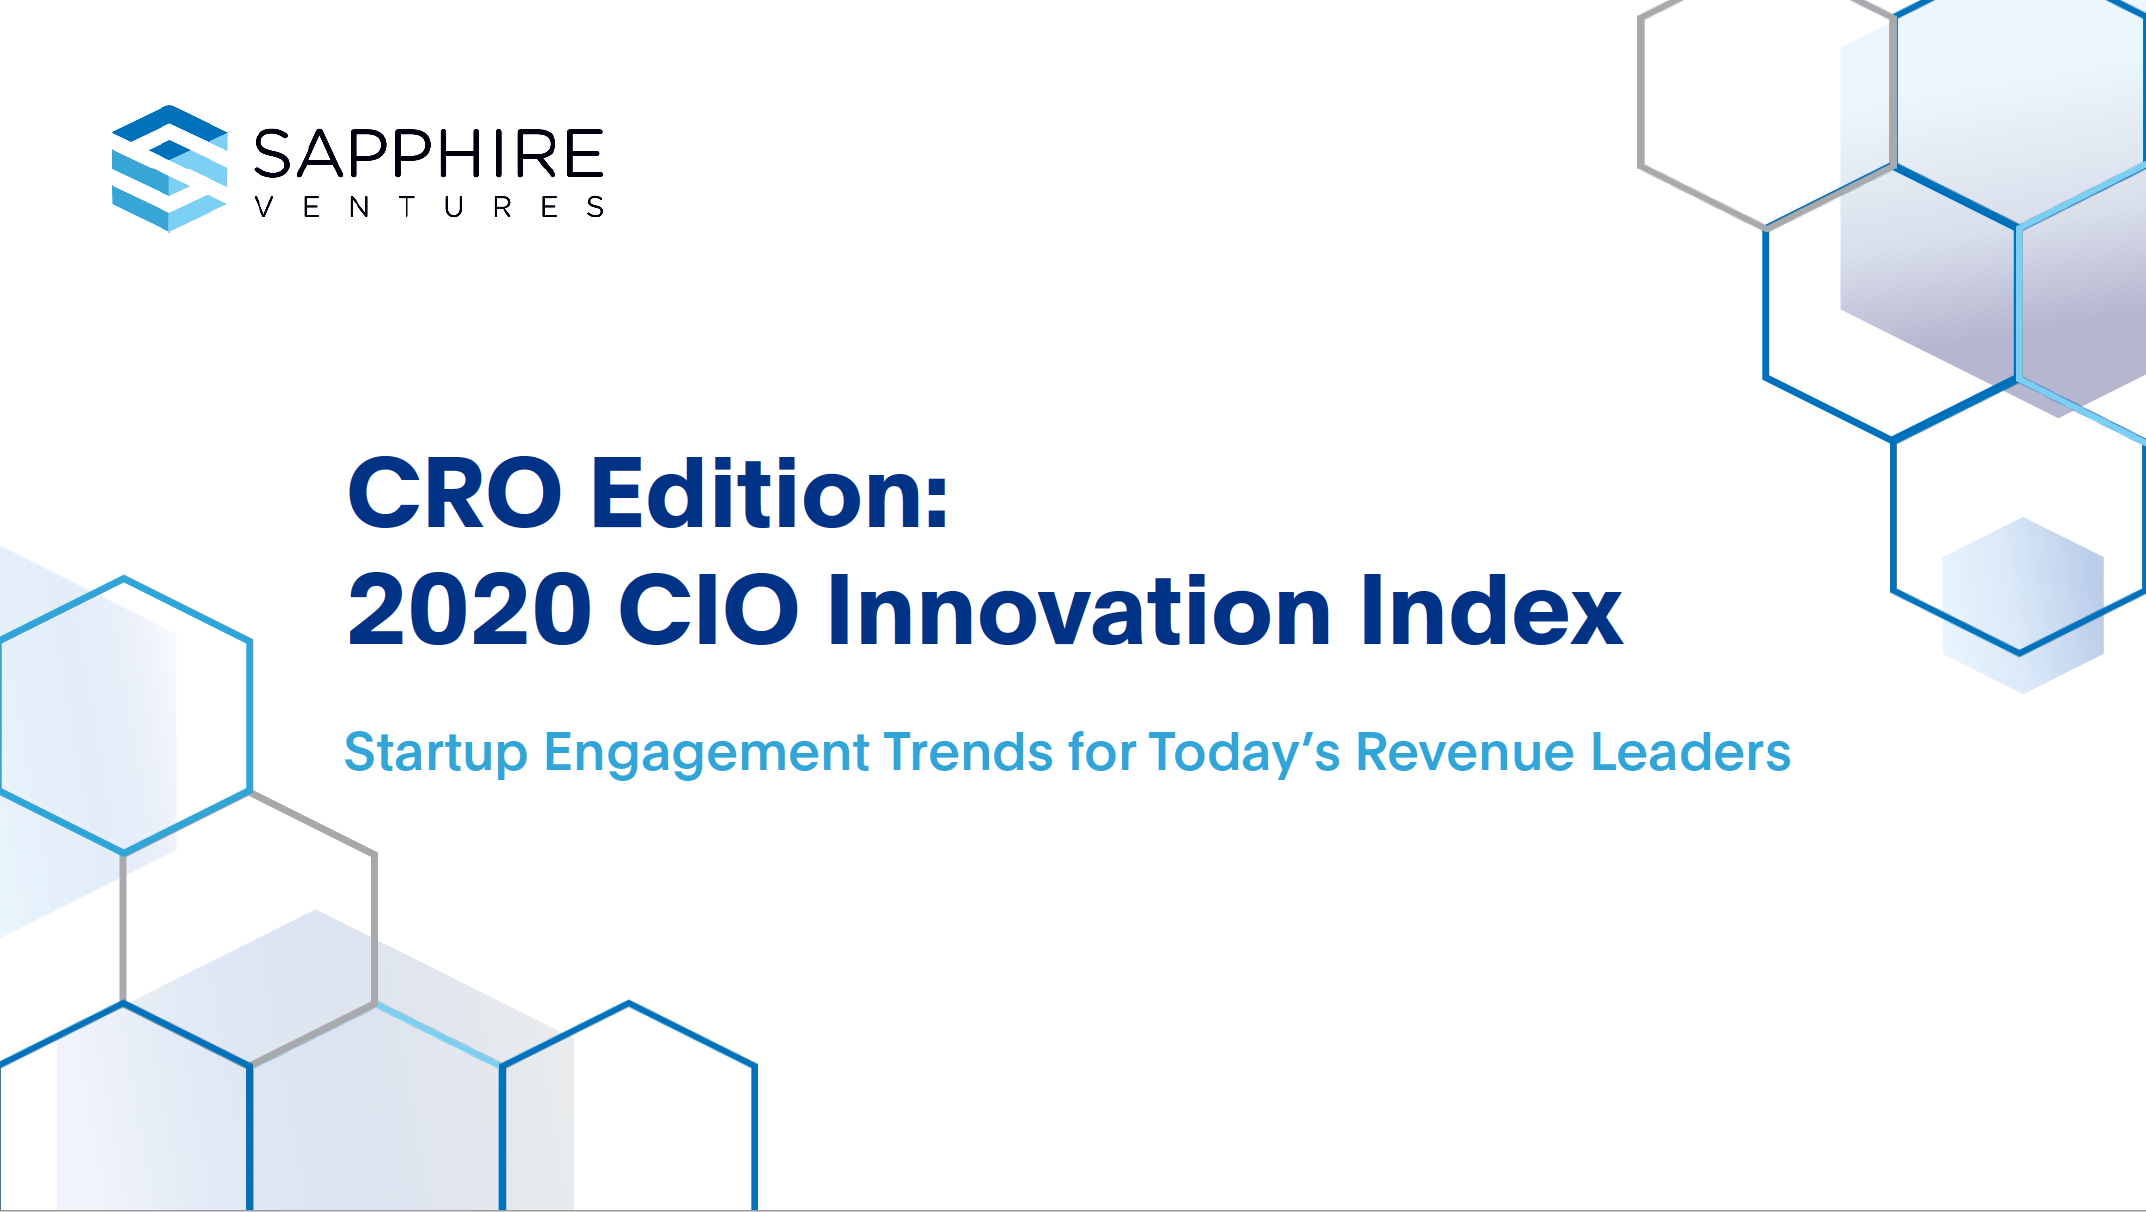 Introducing the CRO Edition of the 2020 CIO Innovation Index: Startup Engagement Trends for Today’s Revenue Leaders